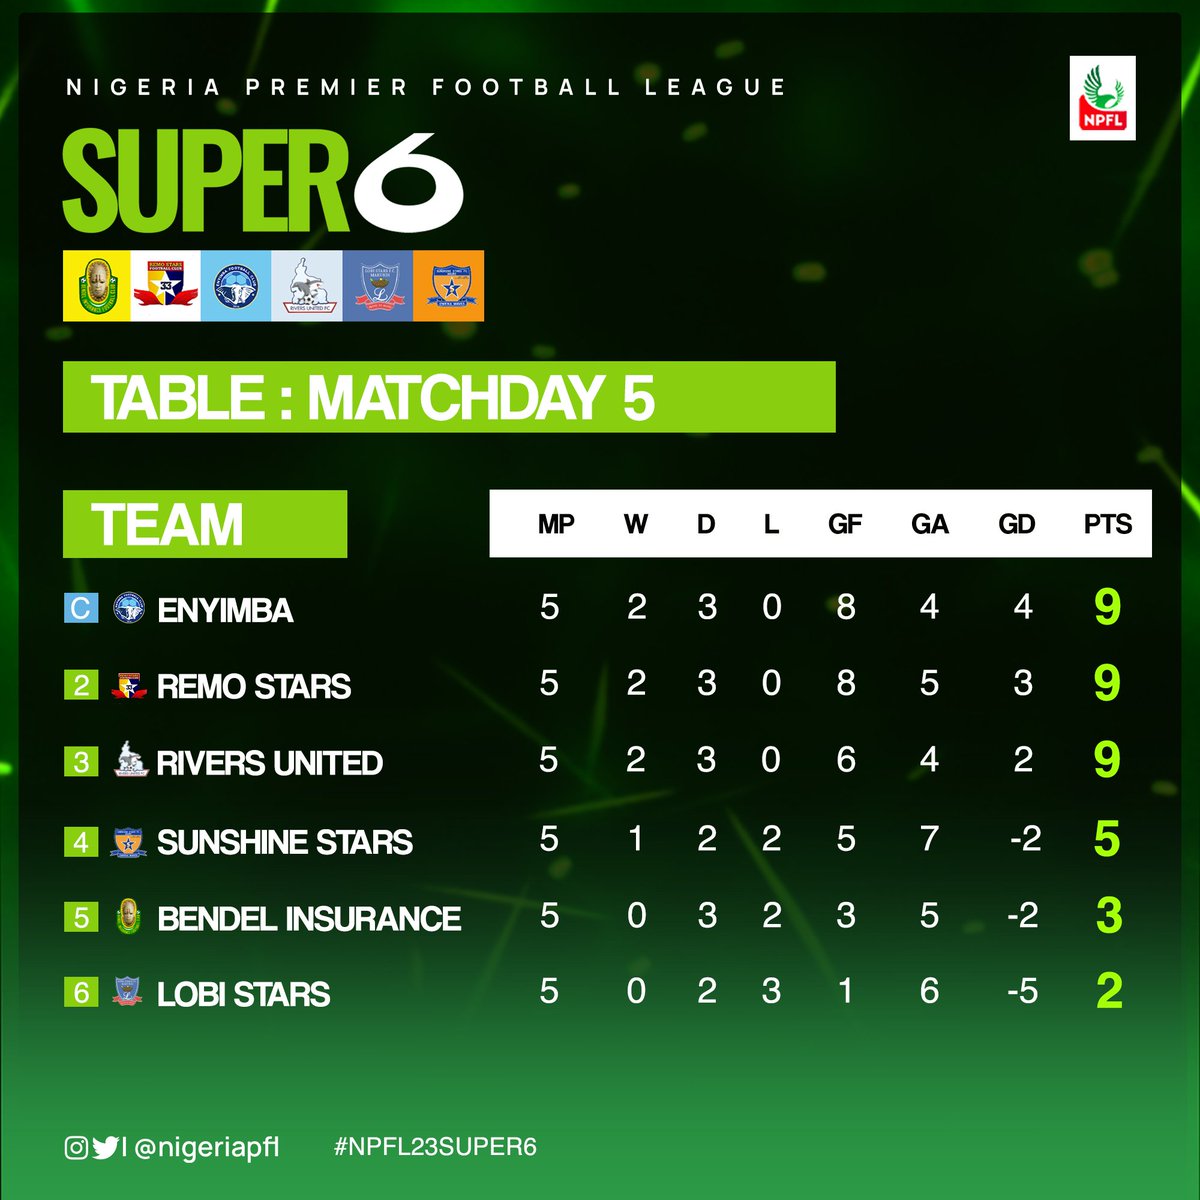 #NPFL23ChampionshipPlayoff 

Final standings

🥇 Enyimba - #CAFCL
🥈 Remo Stars - #CAFCL
🥉Rivers Utd - #CAFCC

#NPFL23 
#NPFL23Super6